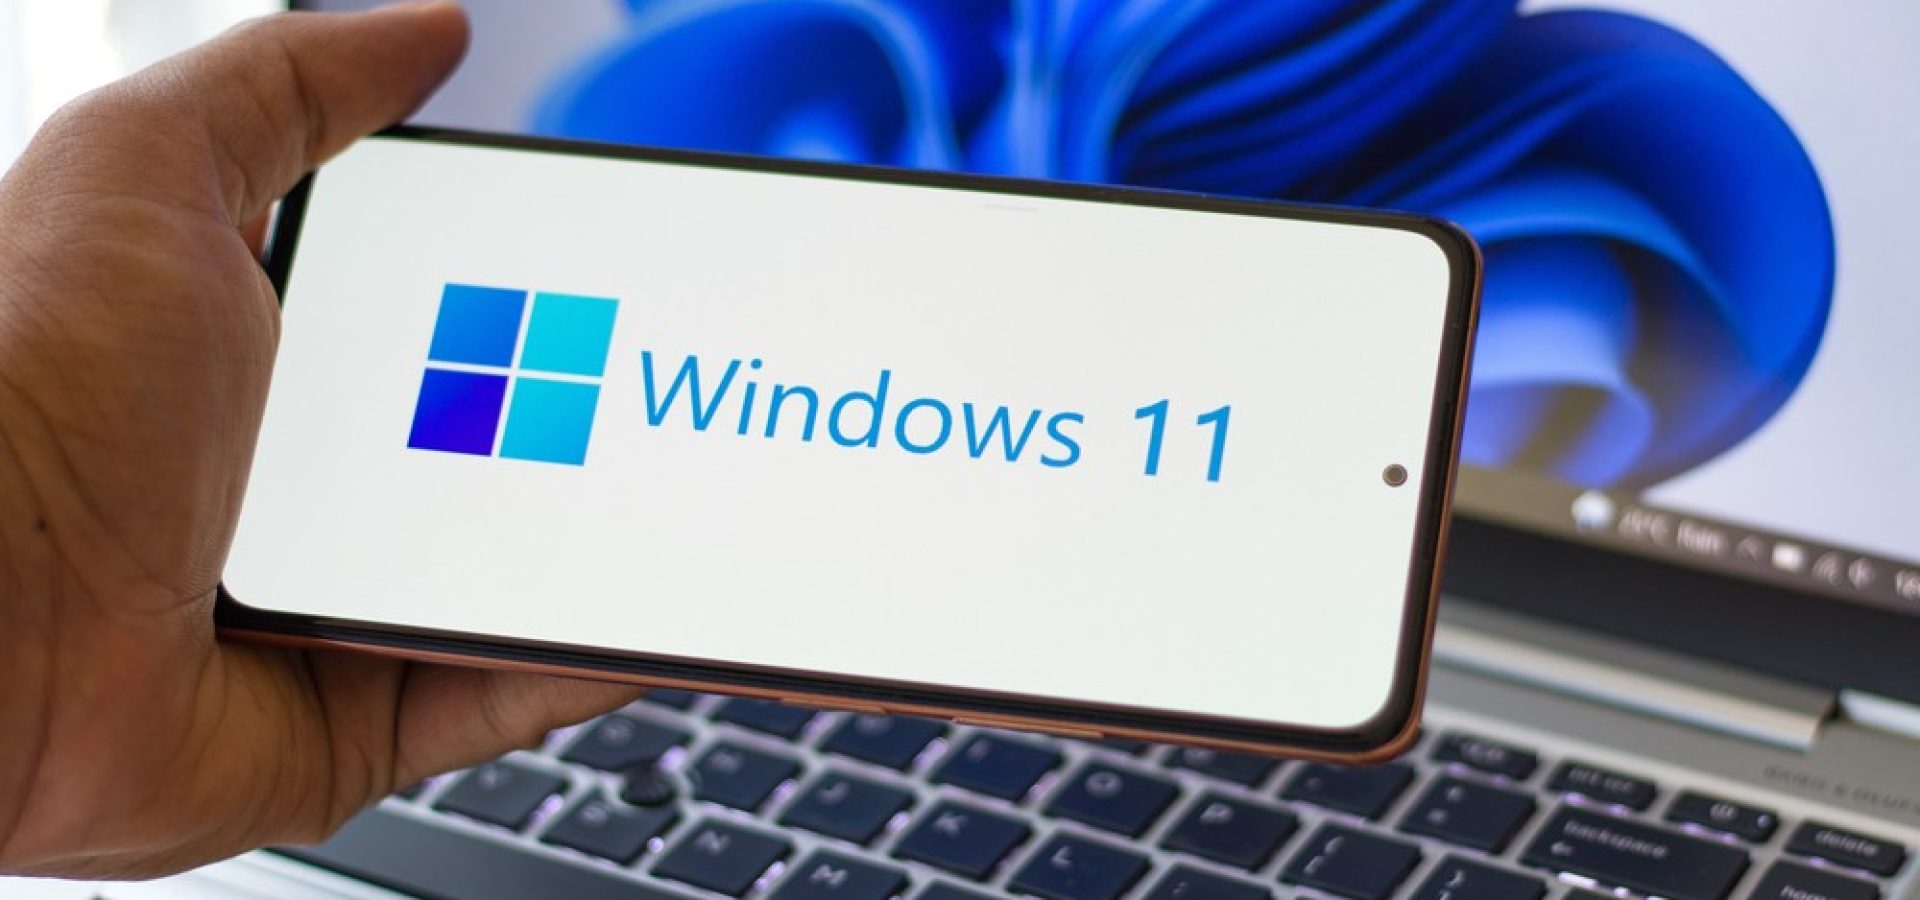 Microsoft's new Windows 11 might anger Apple and Google